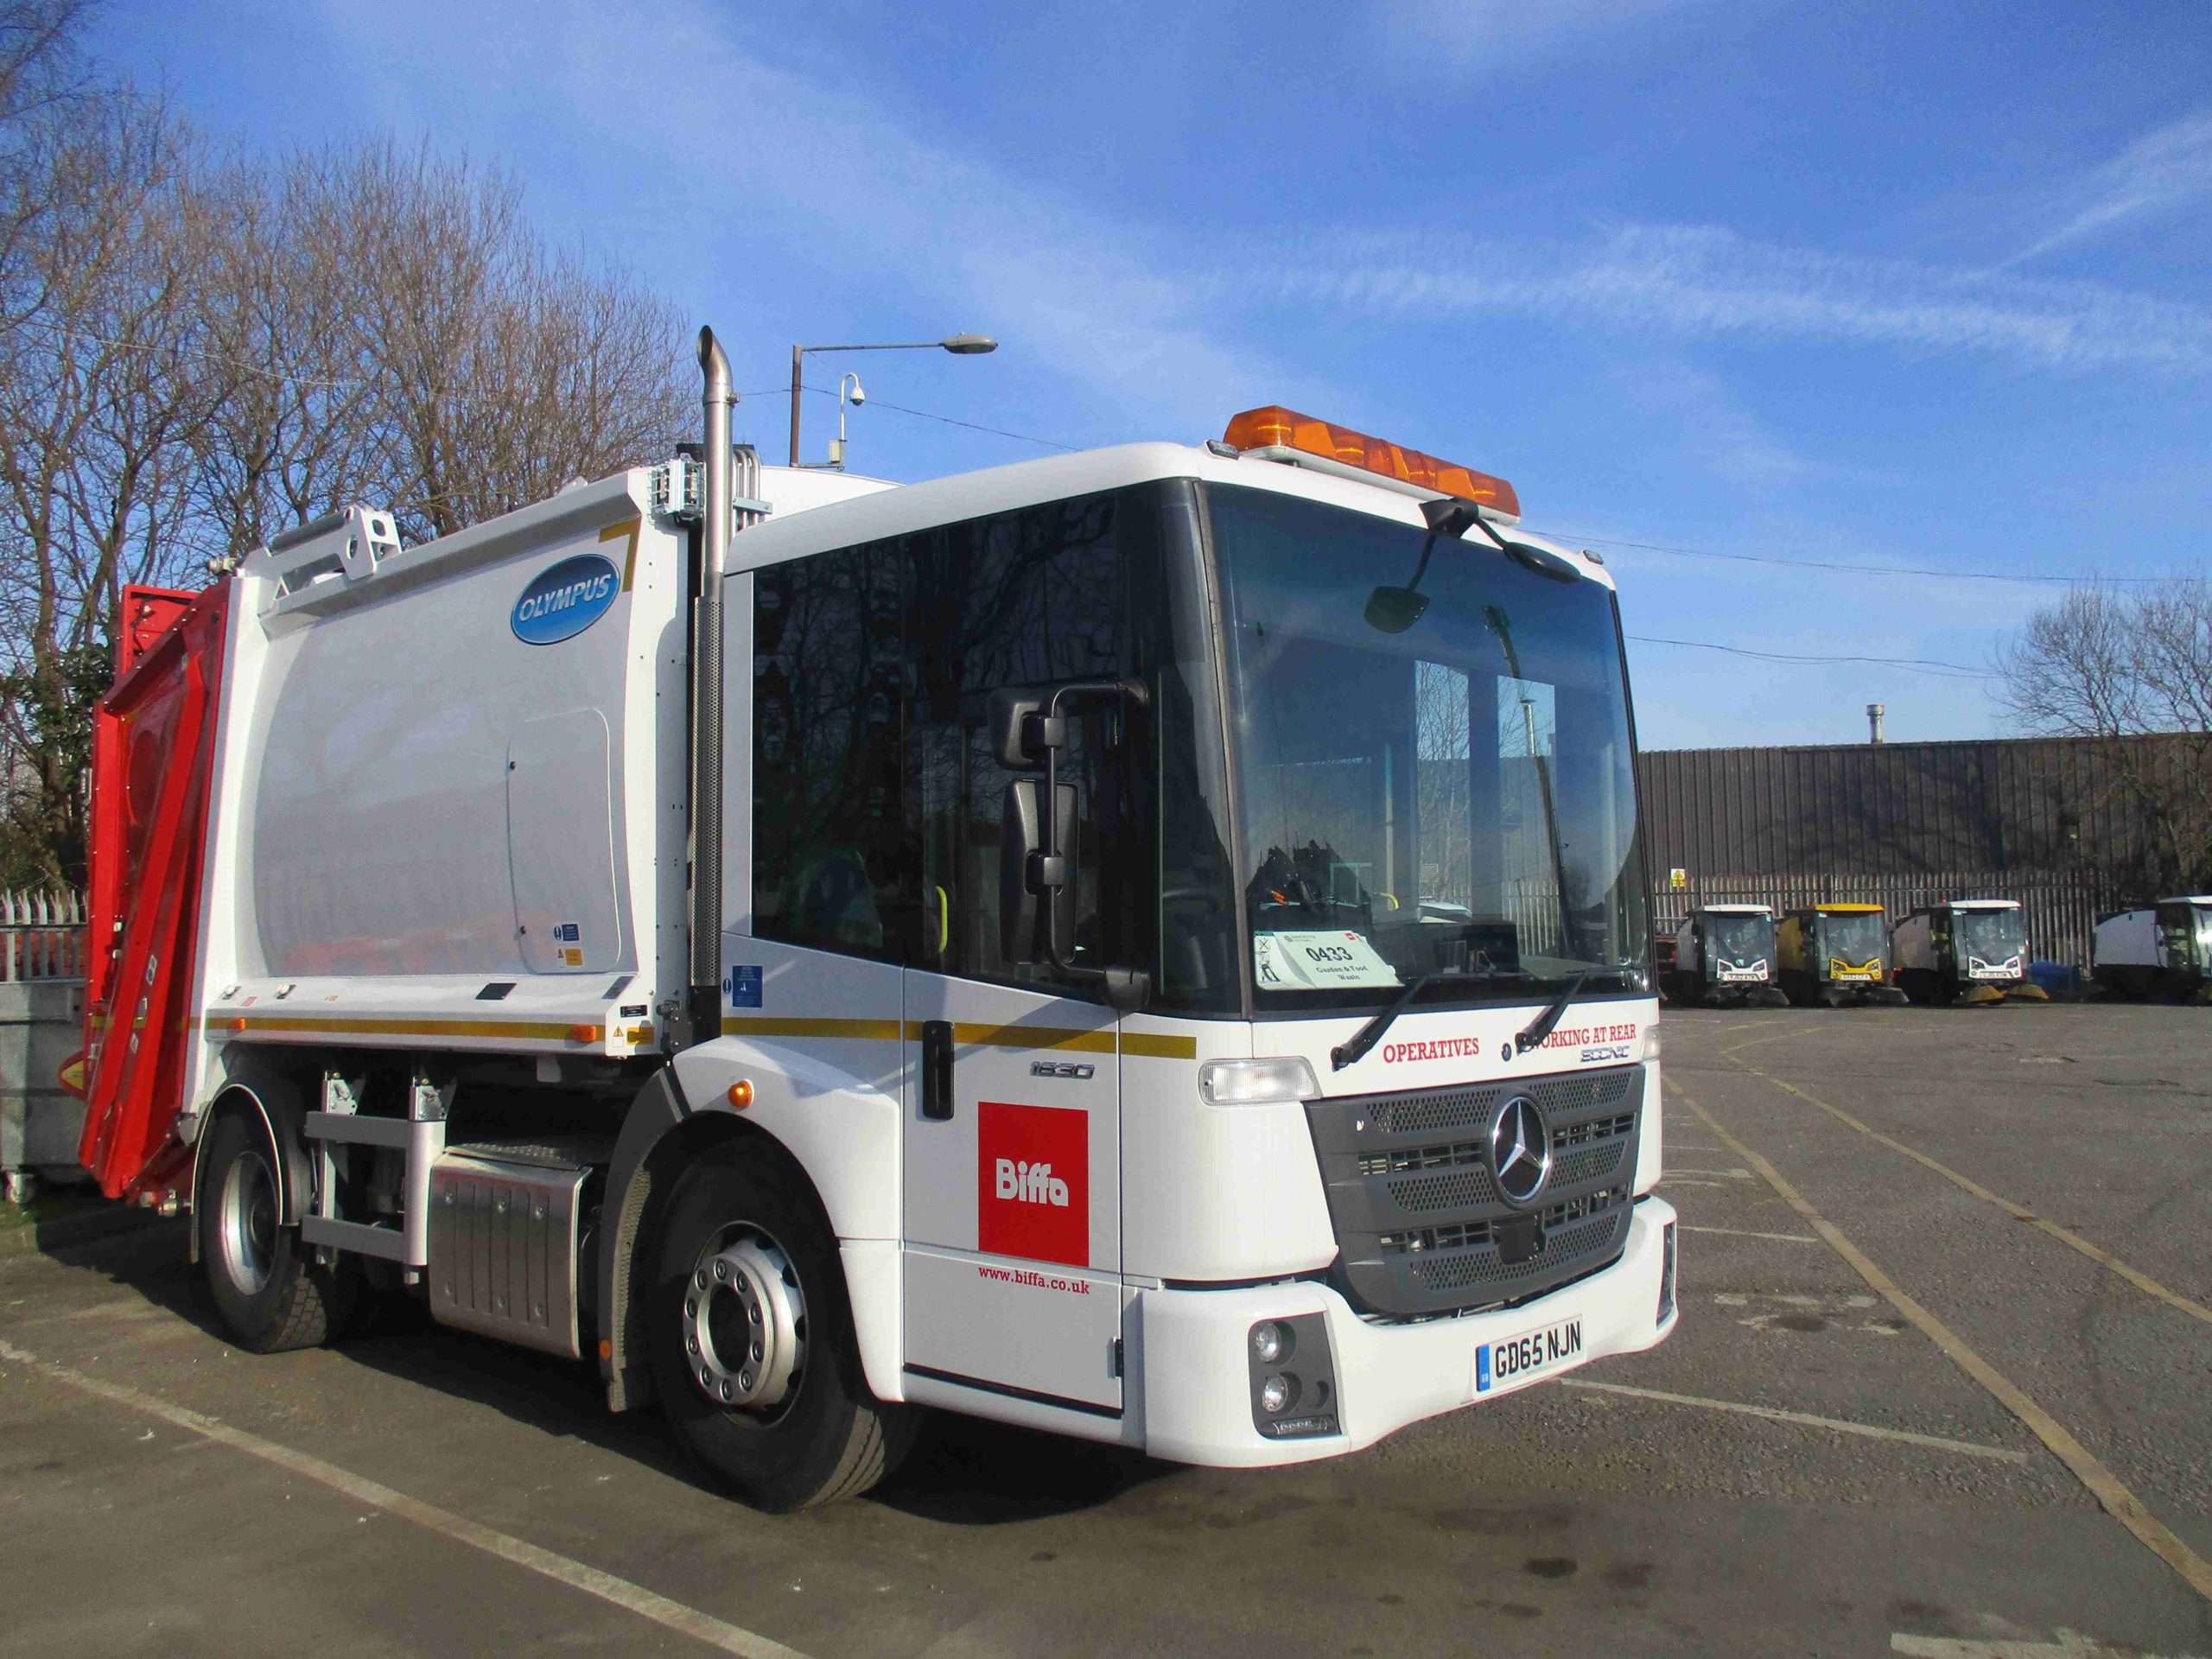 Biffa has taken delivery of several new vehicles to upgrade its Manchester waste collection fleet